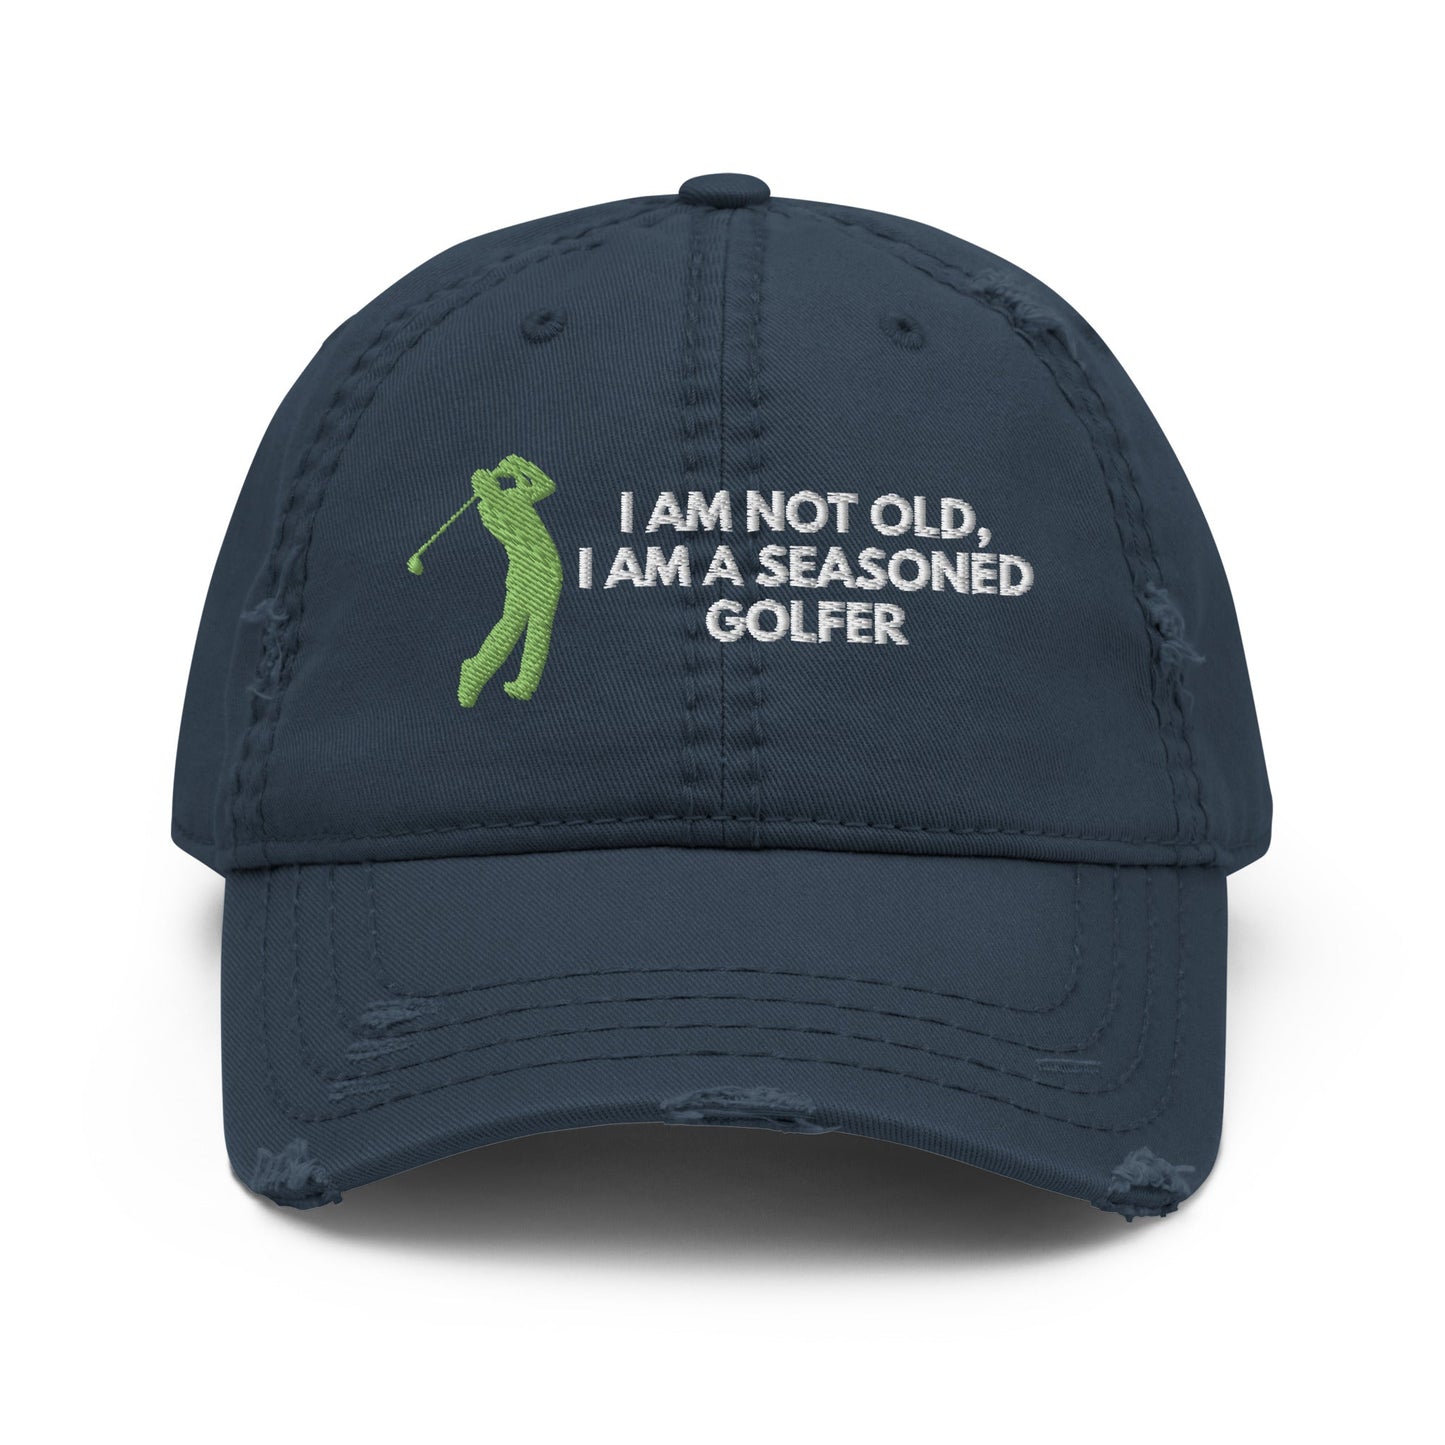 Funny Golfer Gifts  Distressed Cap Navy Im Not Old I Am A Seasoned Golfer Hat Distressed Hat